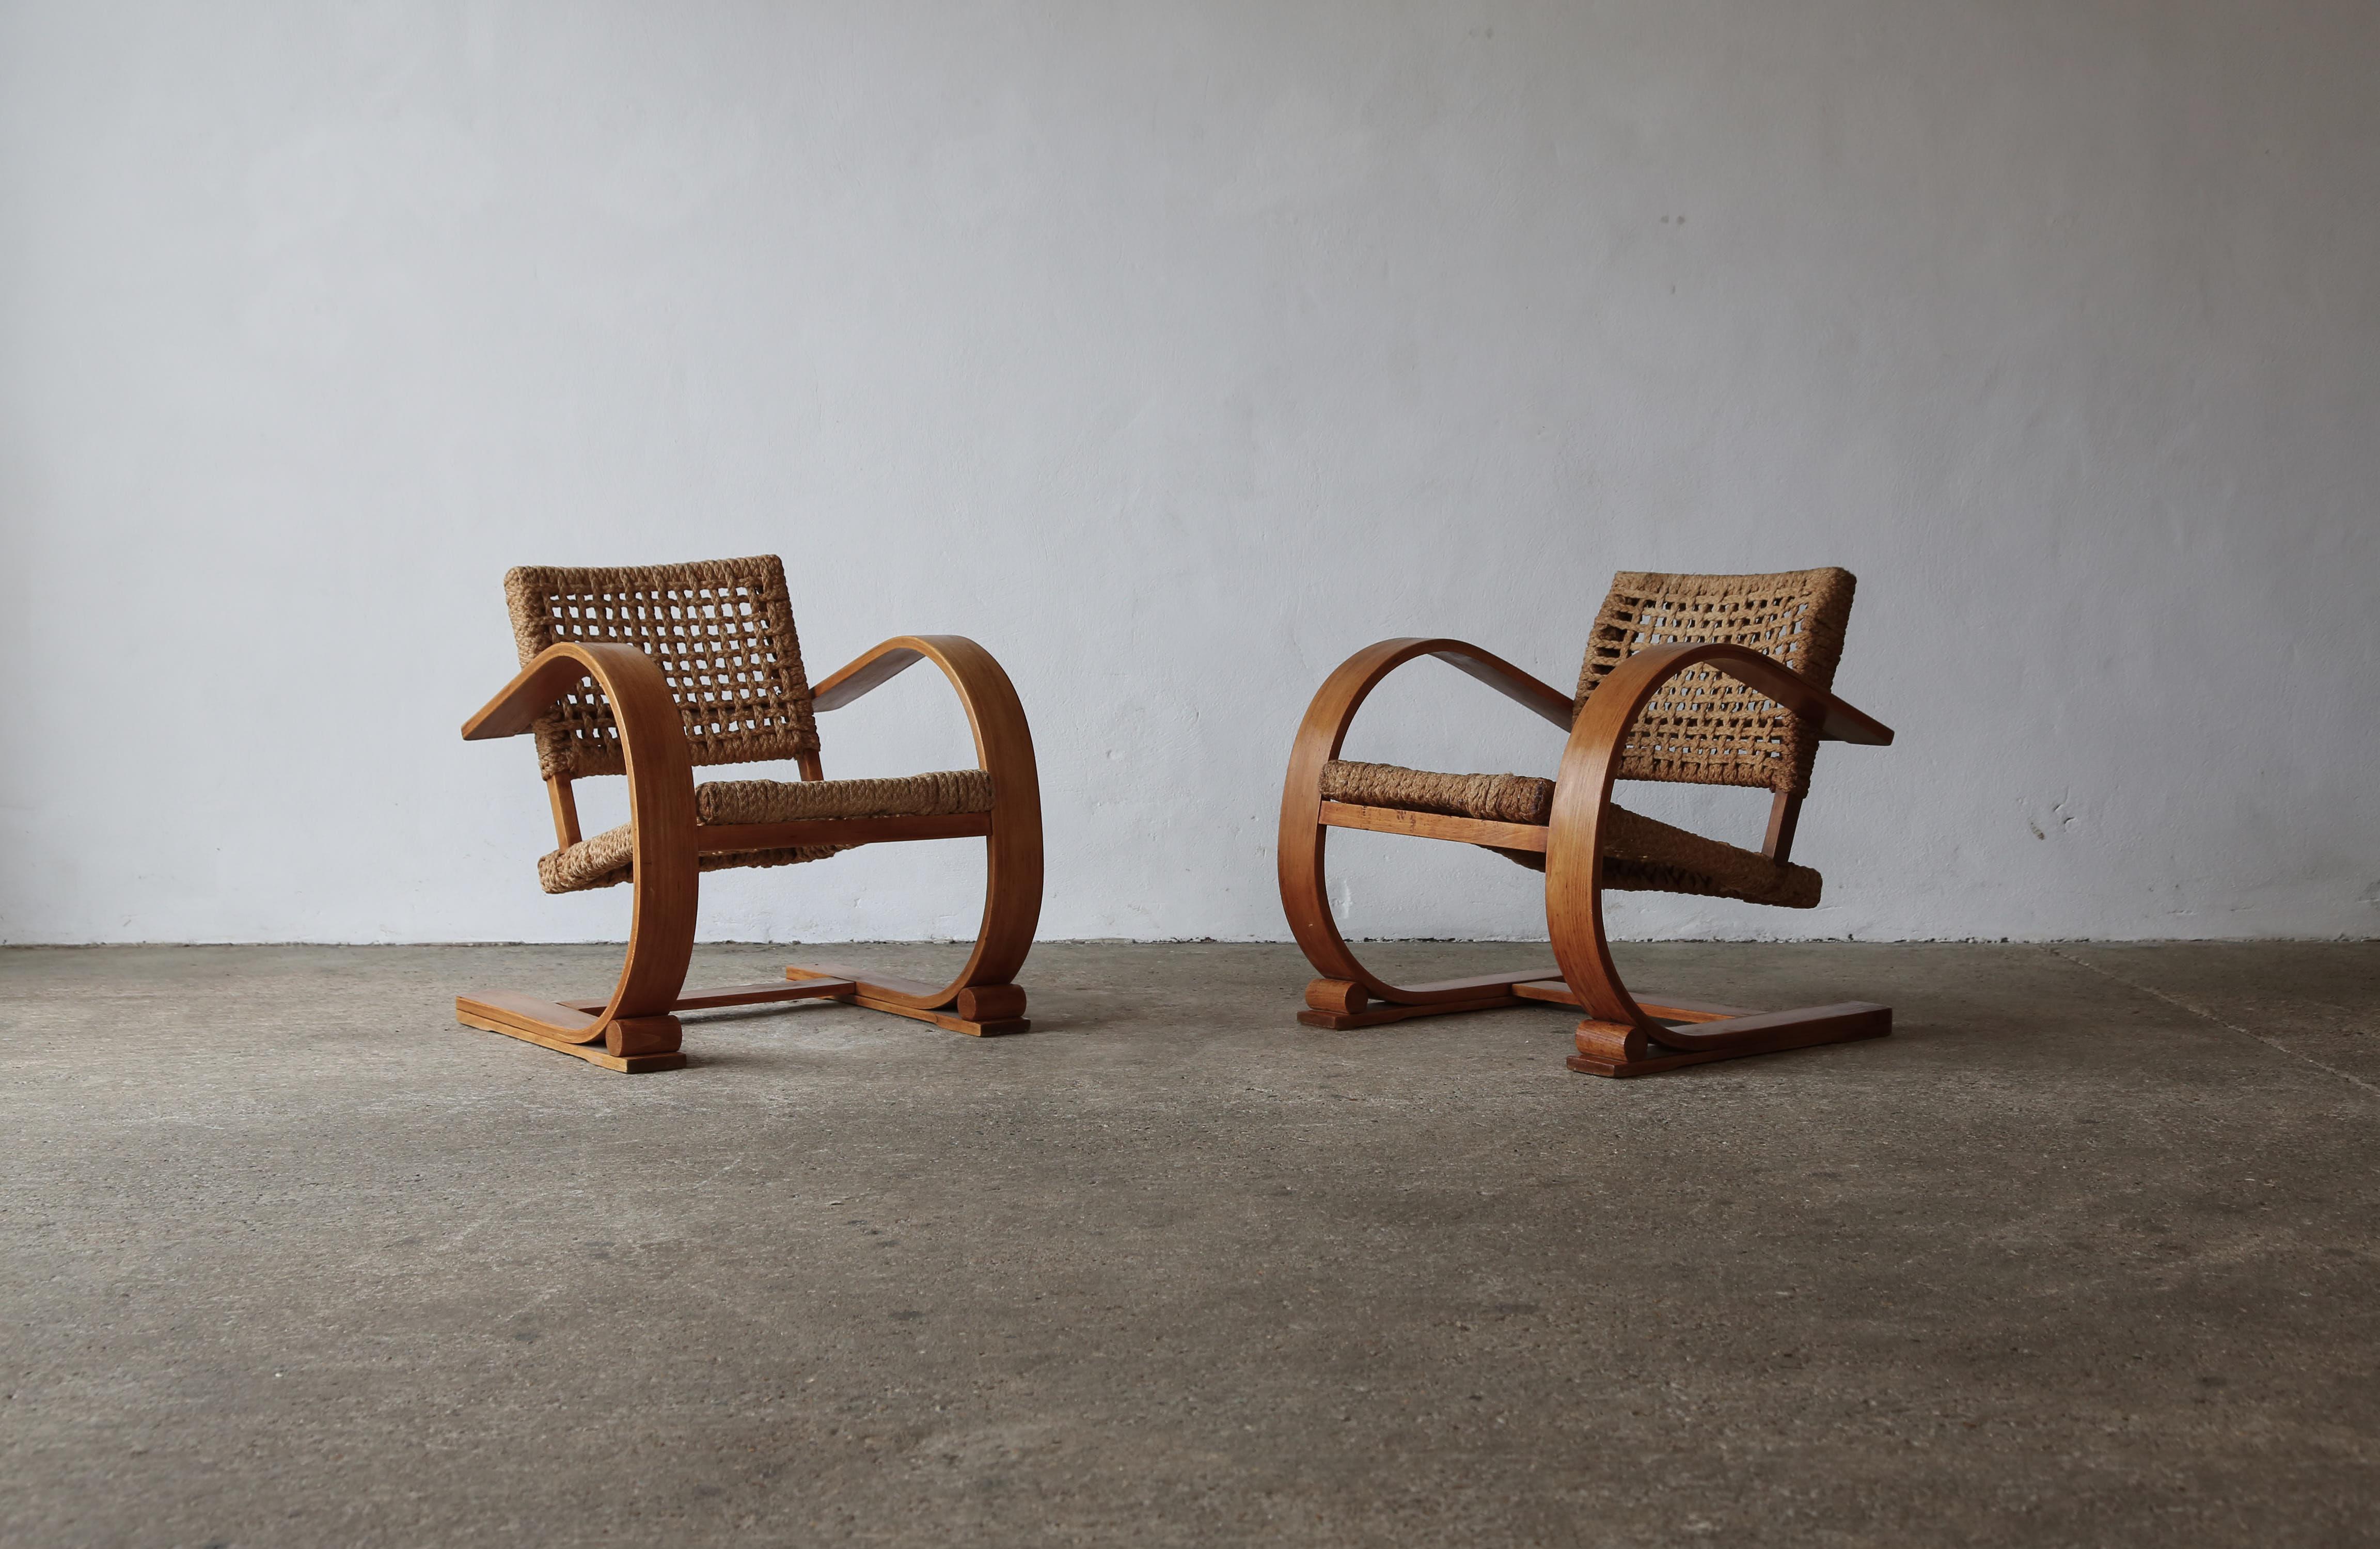 A superb pair of rope and wood cantilever chairs by Frida Minet and Adrien Audoux, 1950s, France. These good examples in original condition, with some wear, marks and signs of age and use to the wood rope. Fast shipping worldwide.



